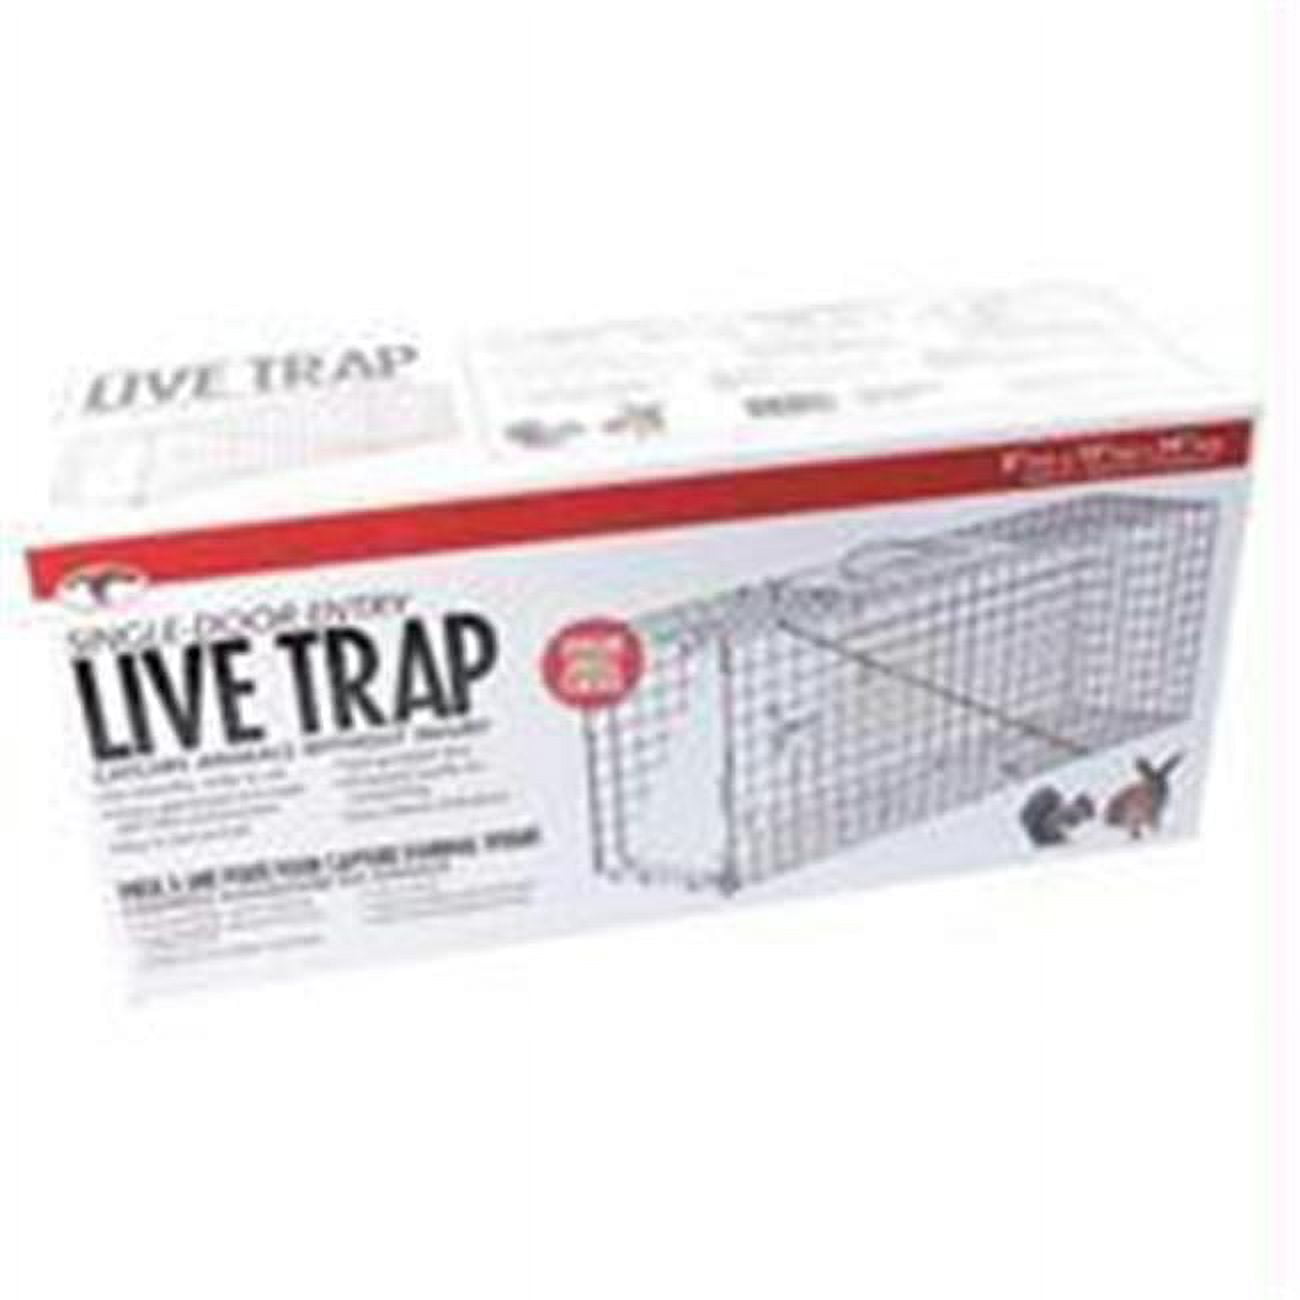 New Video: How to Set the Little Giant® Live Animal Traps - Miller